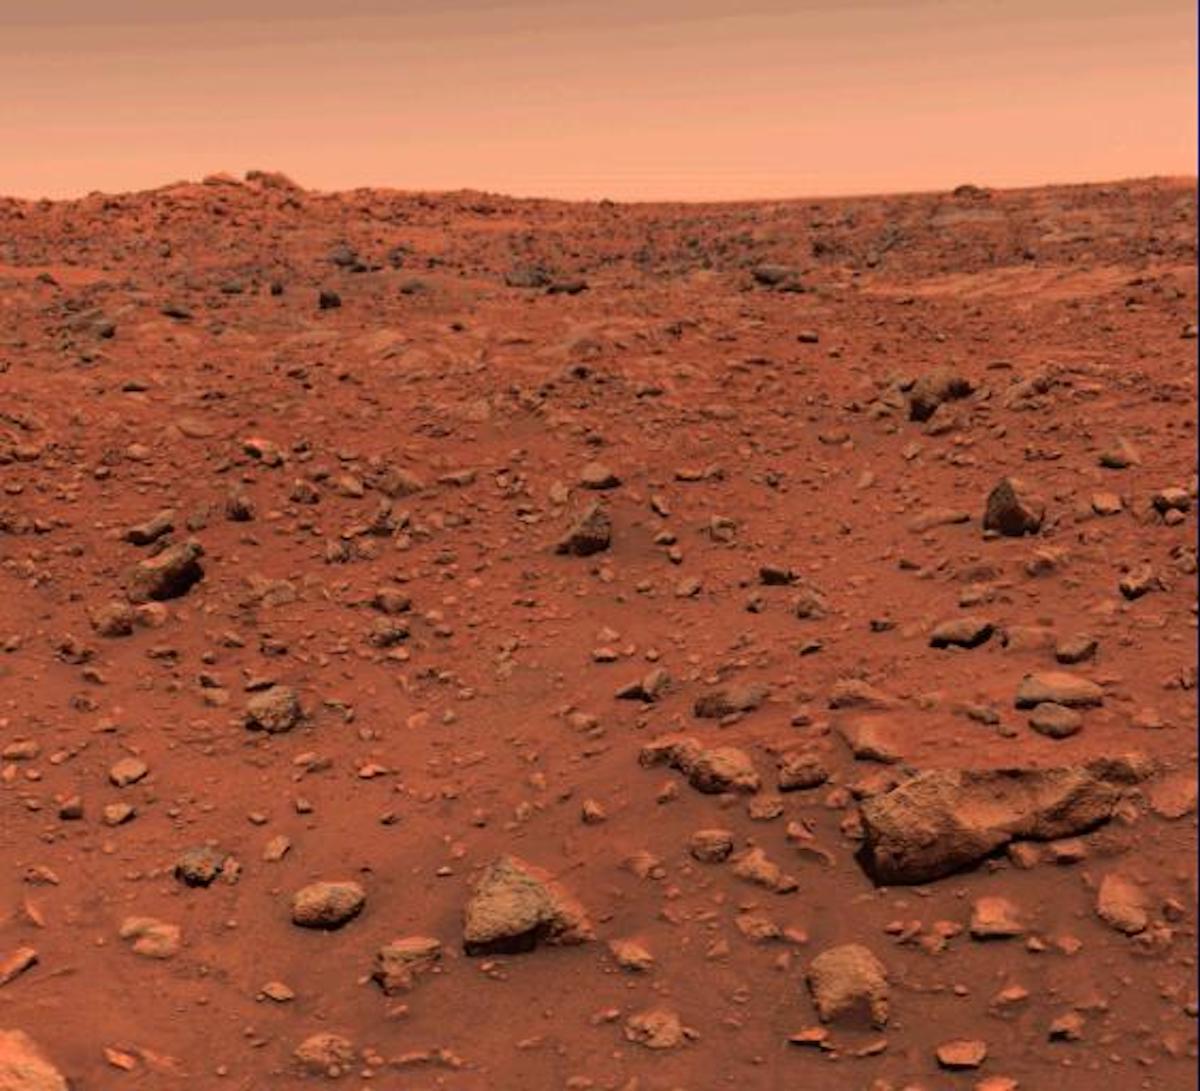 an image of Mars taken from the planet's surface